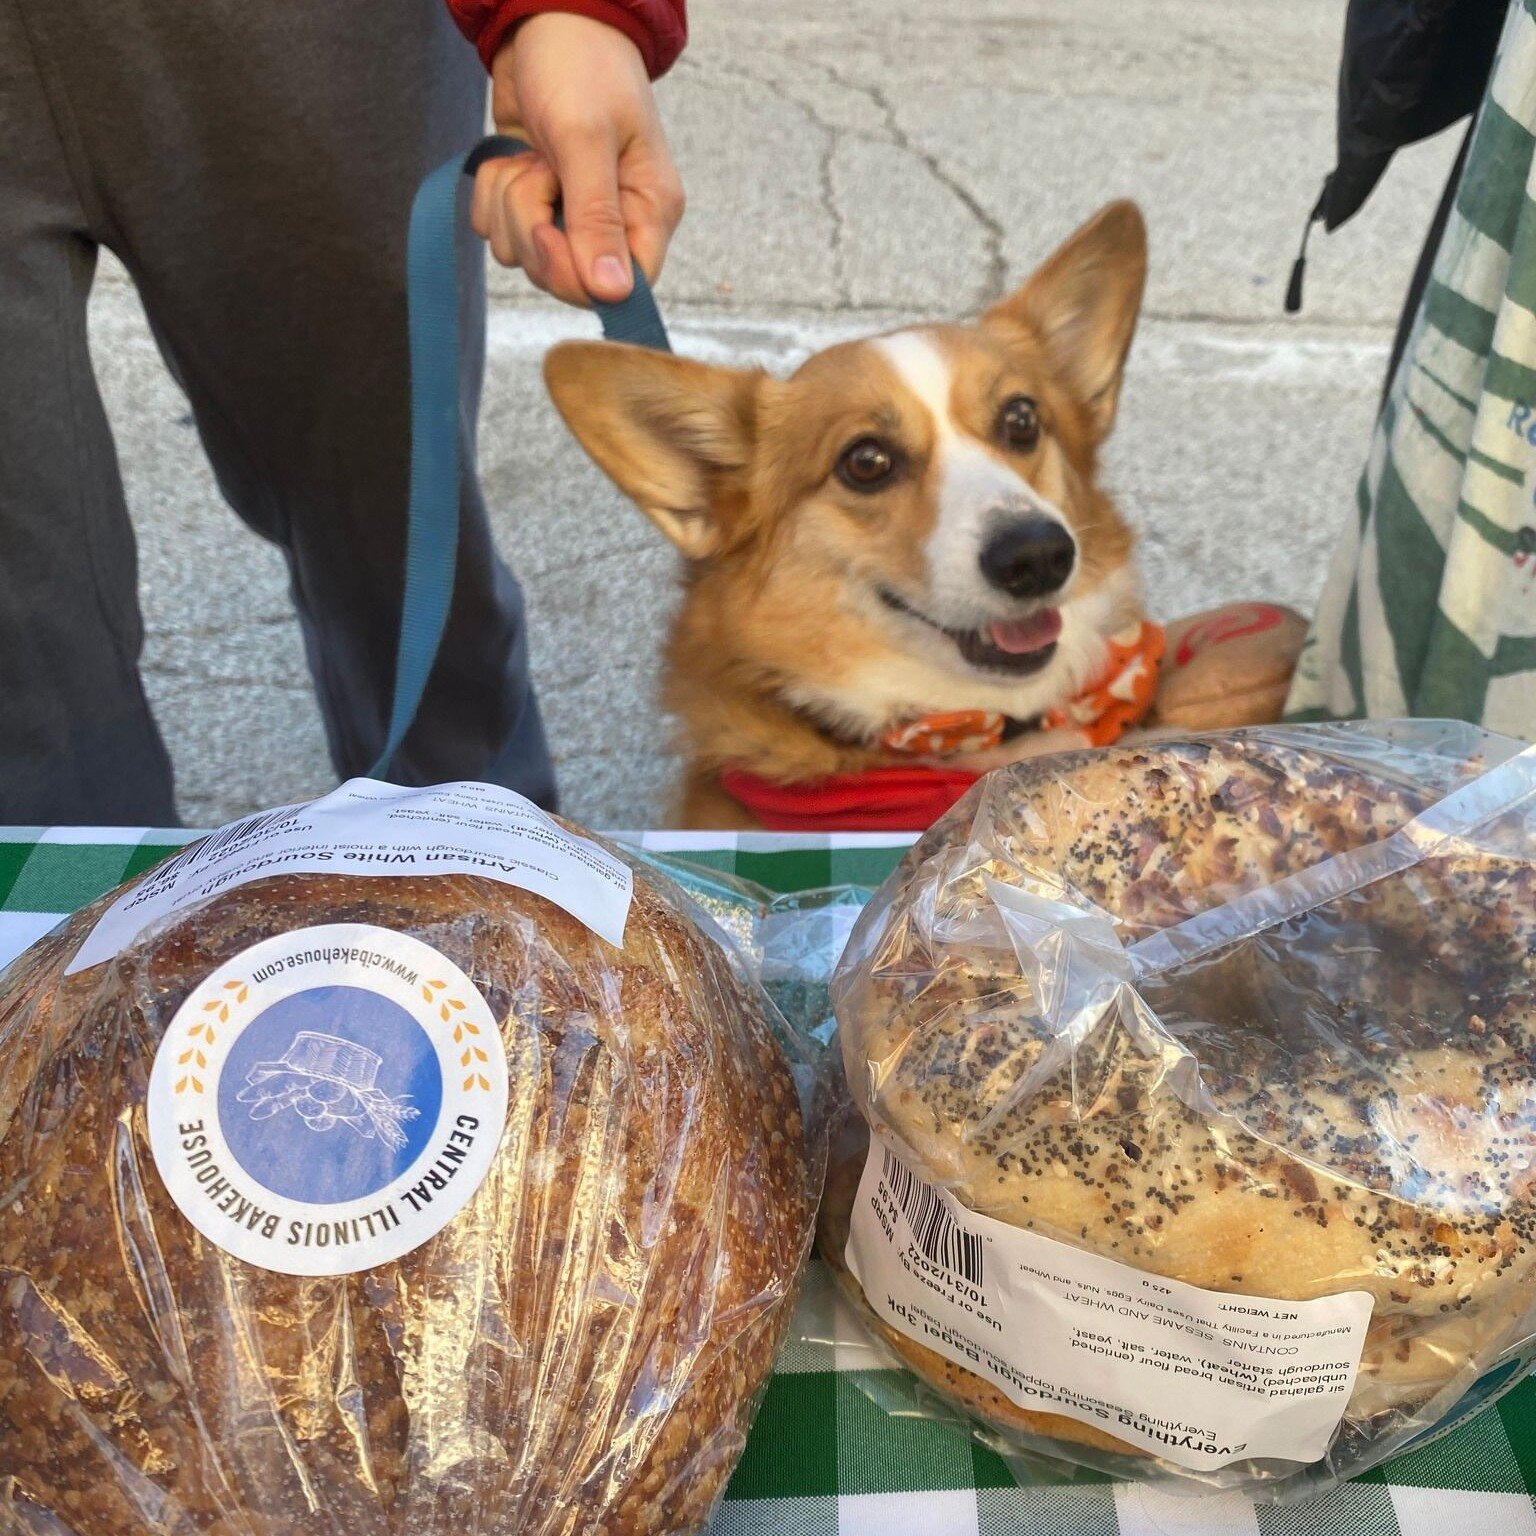 This is your friendly reminder to set your alarms ⏰ early for tomorrow's farmers market @bloomingtonmarket We will have all the bread, pastries, and more available! 

Martinelli's Market - Bloomington is open every Saturday from 7:00 am - 2:00 pm at 